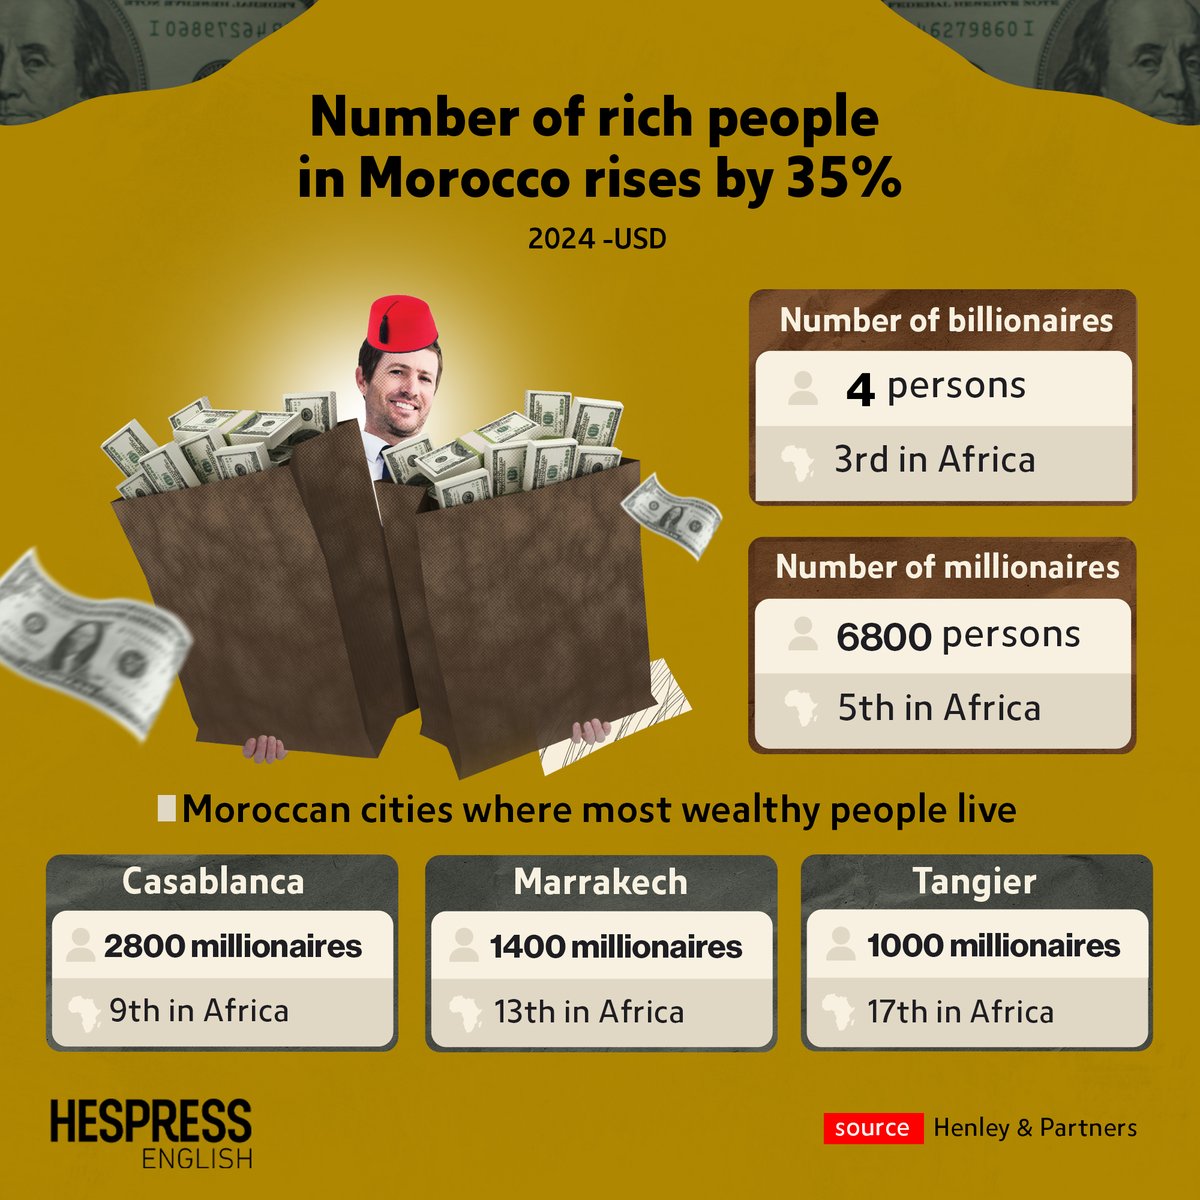 According to a study by Henley and Partners, the number of wealthy Moroccans will have increased by 35% by 2024. A significant proportion of this population is concentrated in Casablanca, Marrakech and Tangier.

#Morocco #Billionaire #Millionaire #Money #Wealth
#HespressEng